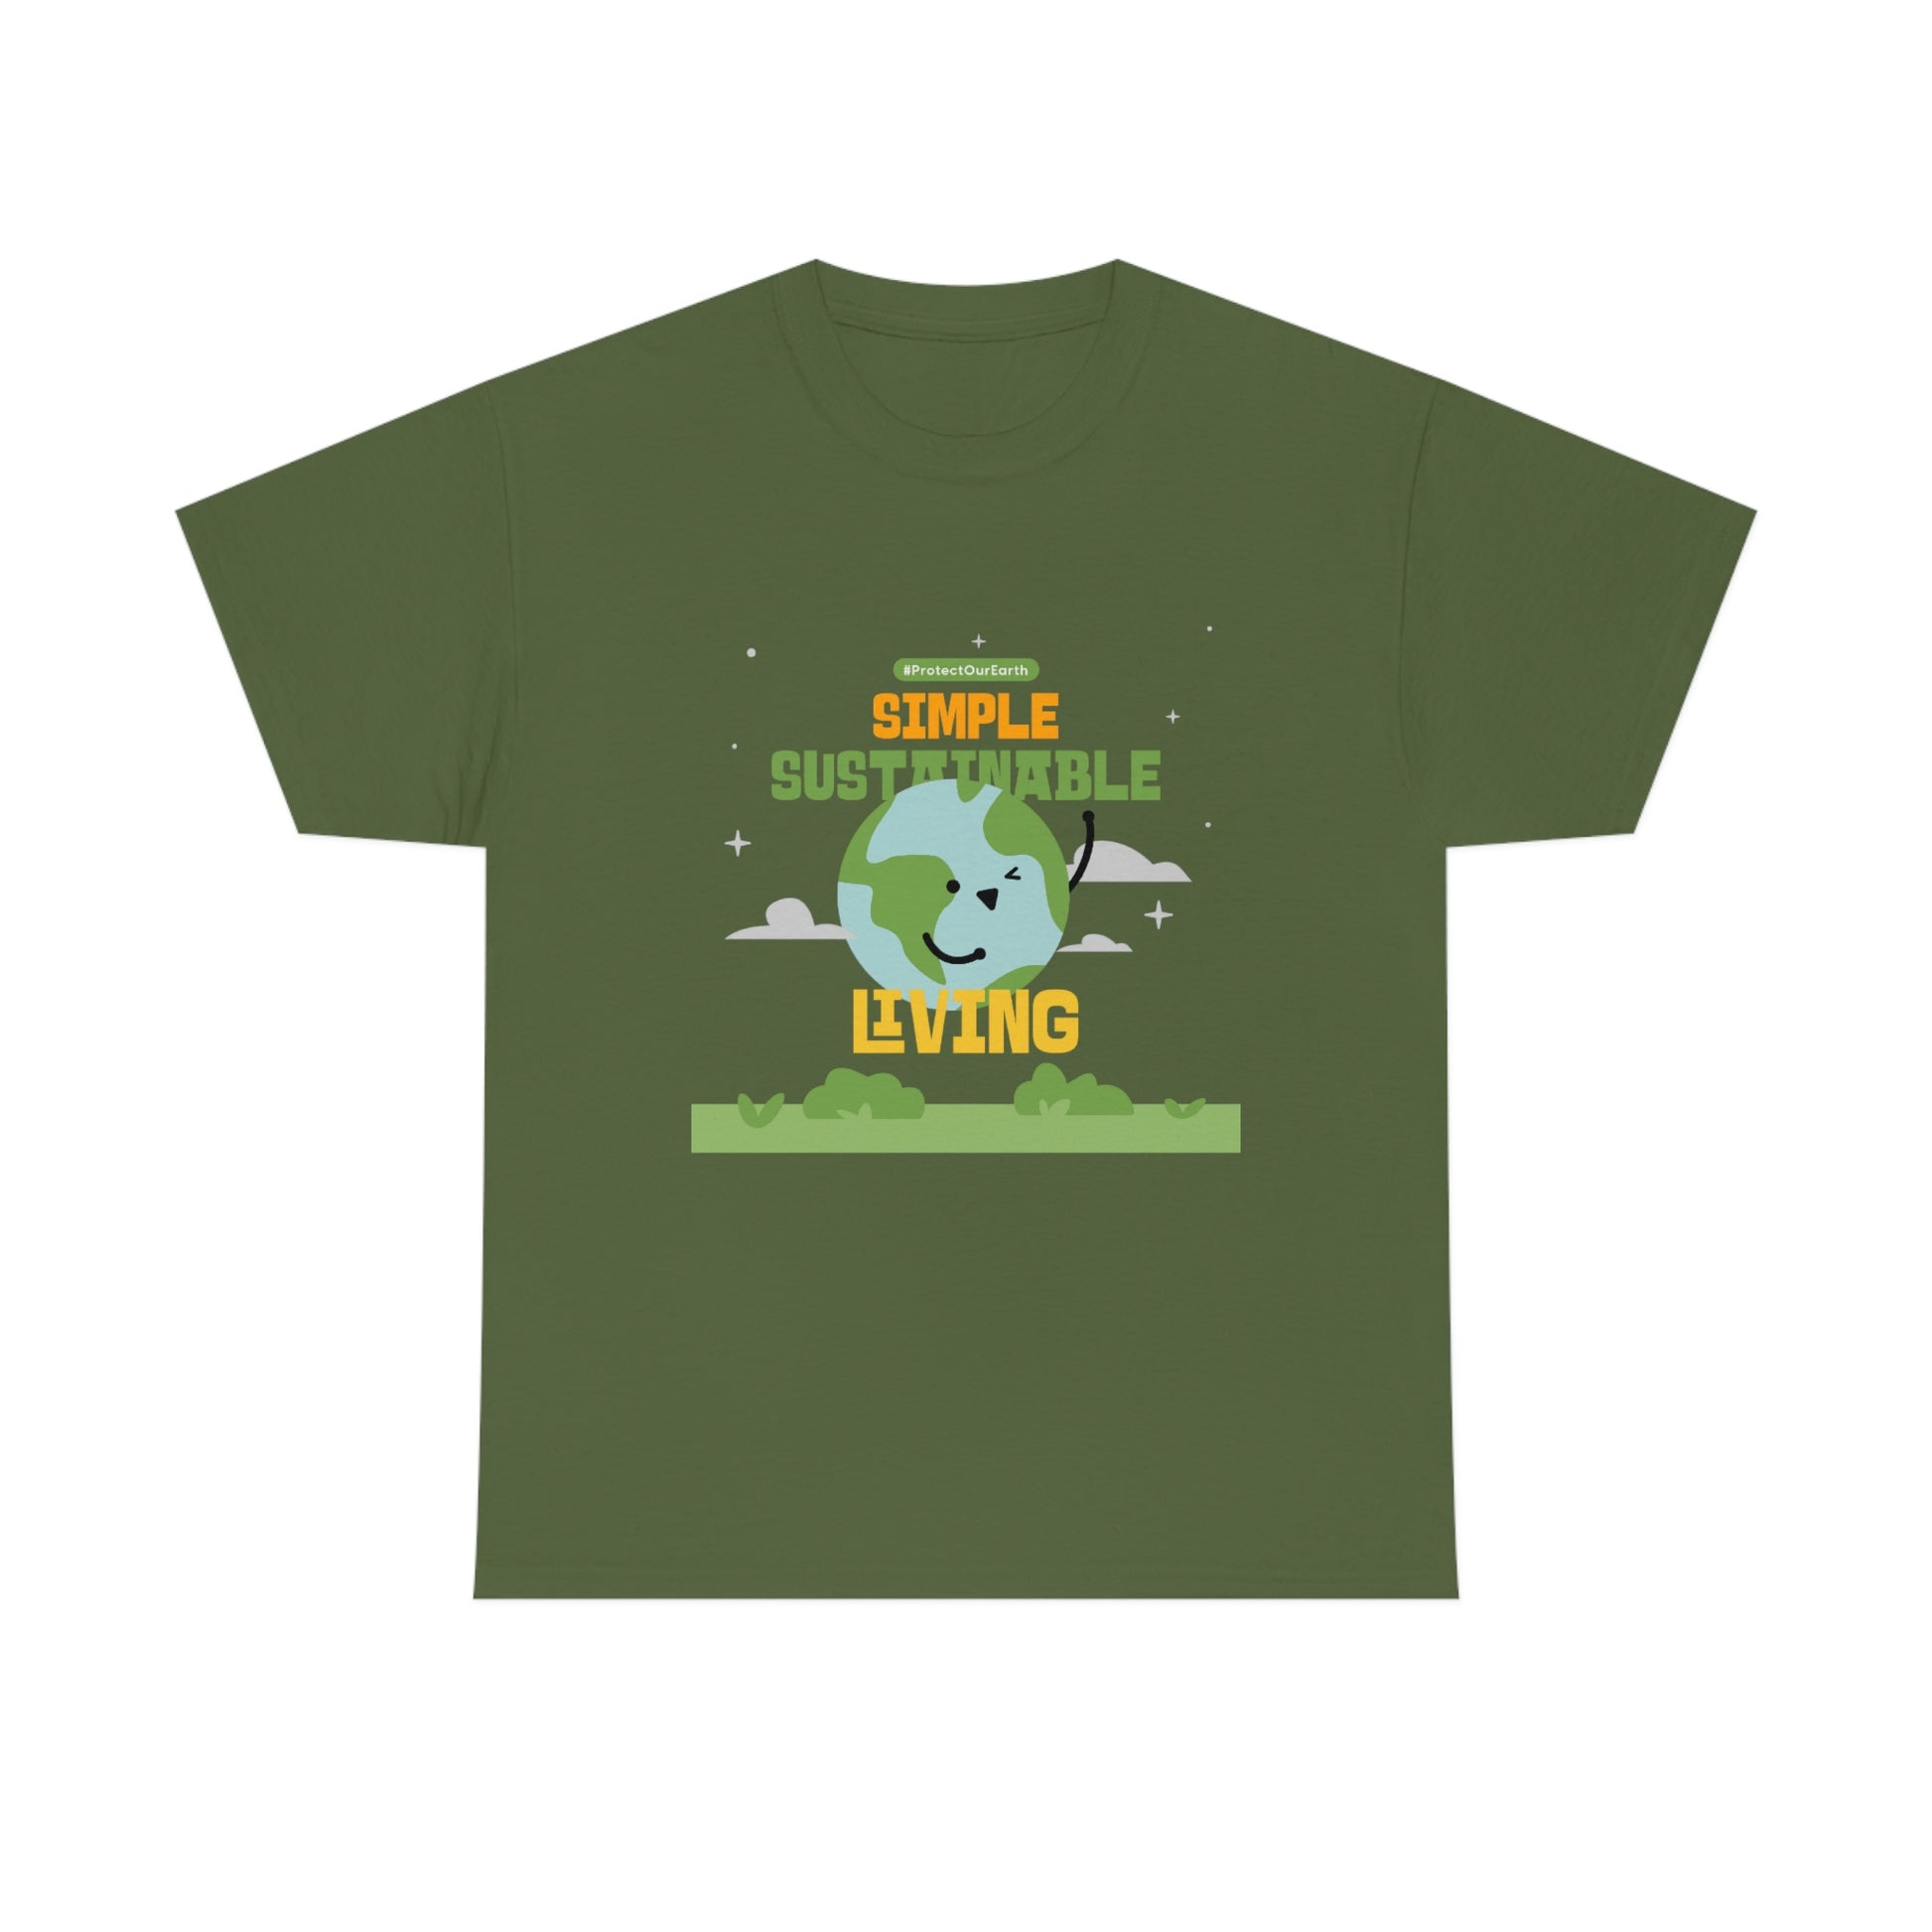 Flat front view of the military green shirt